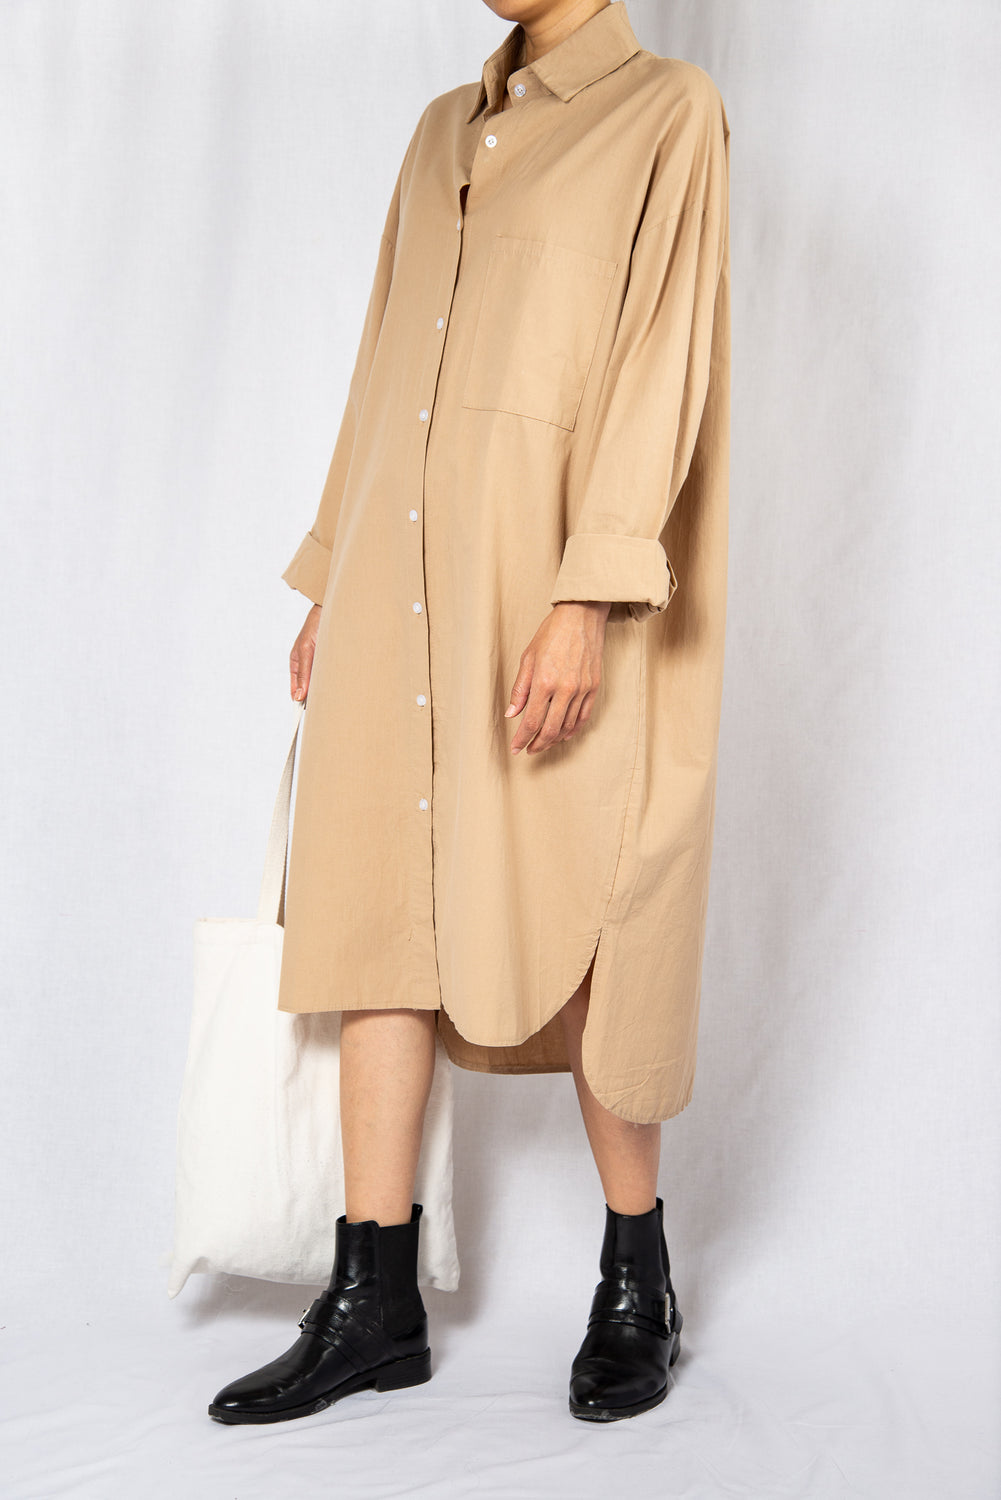 MODZ Beige Loose Midi Shirt Dress with Long Sleeves Modest Oversized Knee-Length Collared Dress in Lightweight 100% Cotton